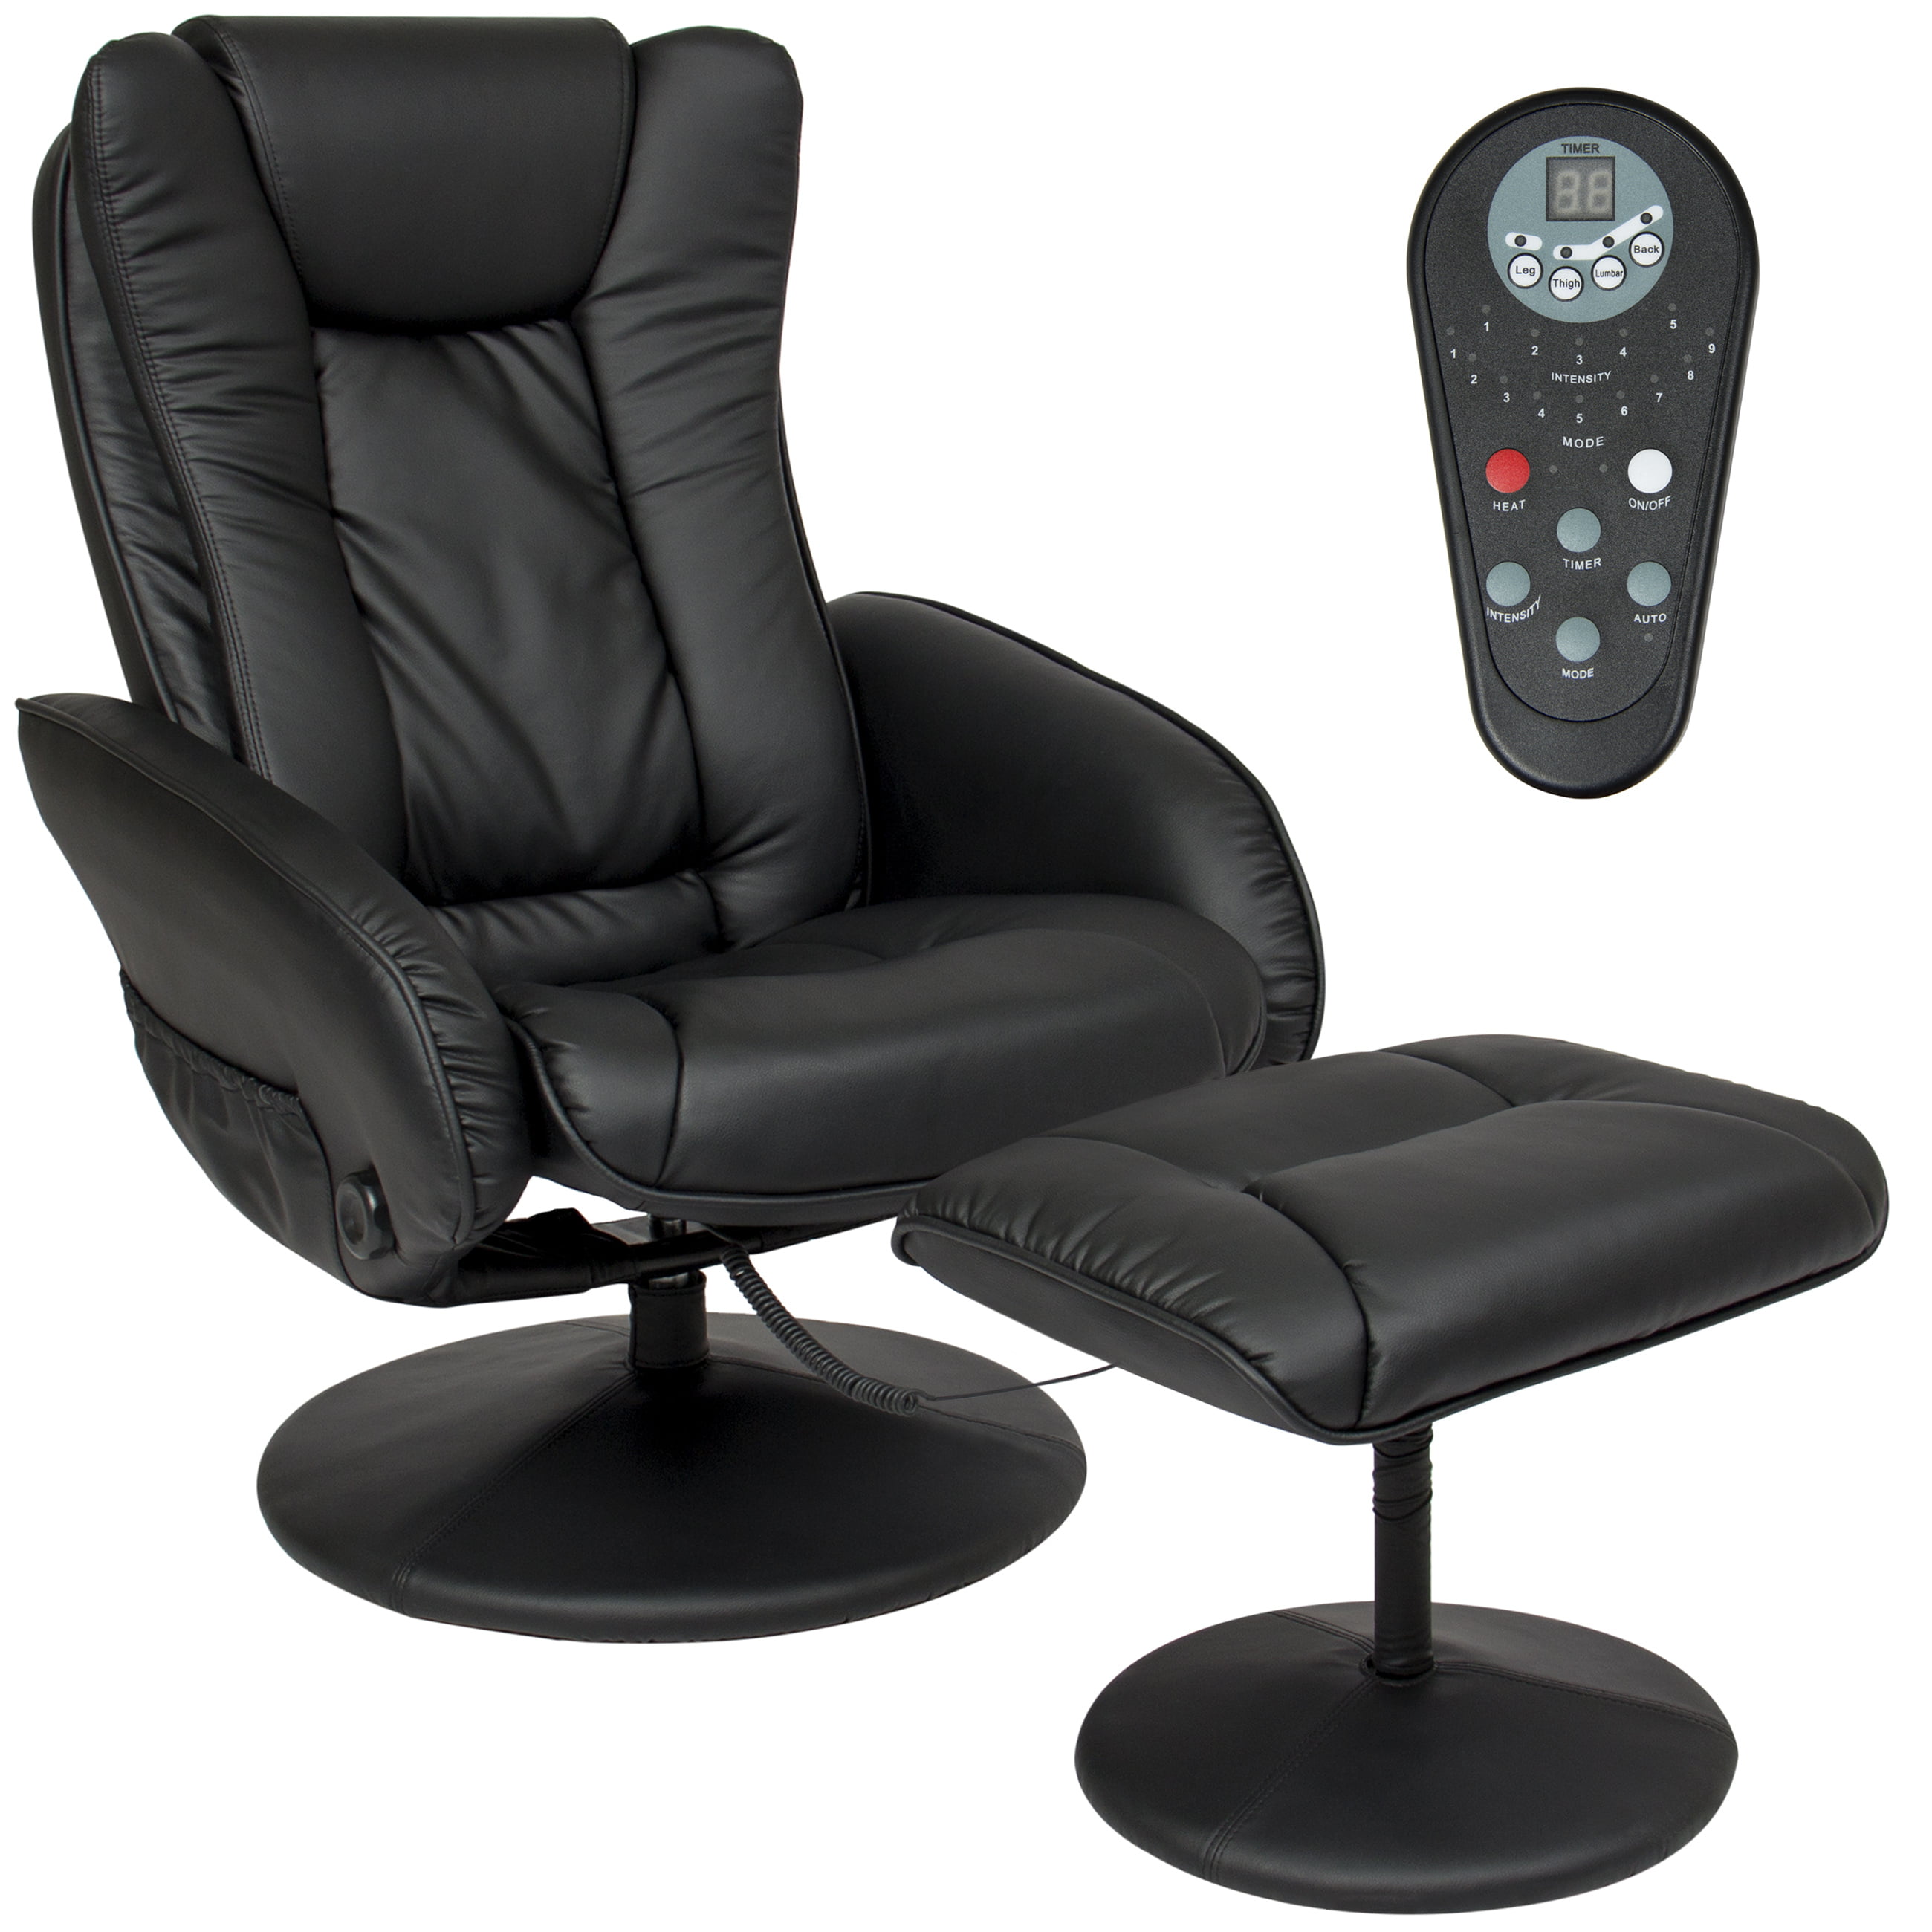 Leather Massage Recliner And Ottoman, Leather Massage Chairs